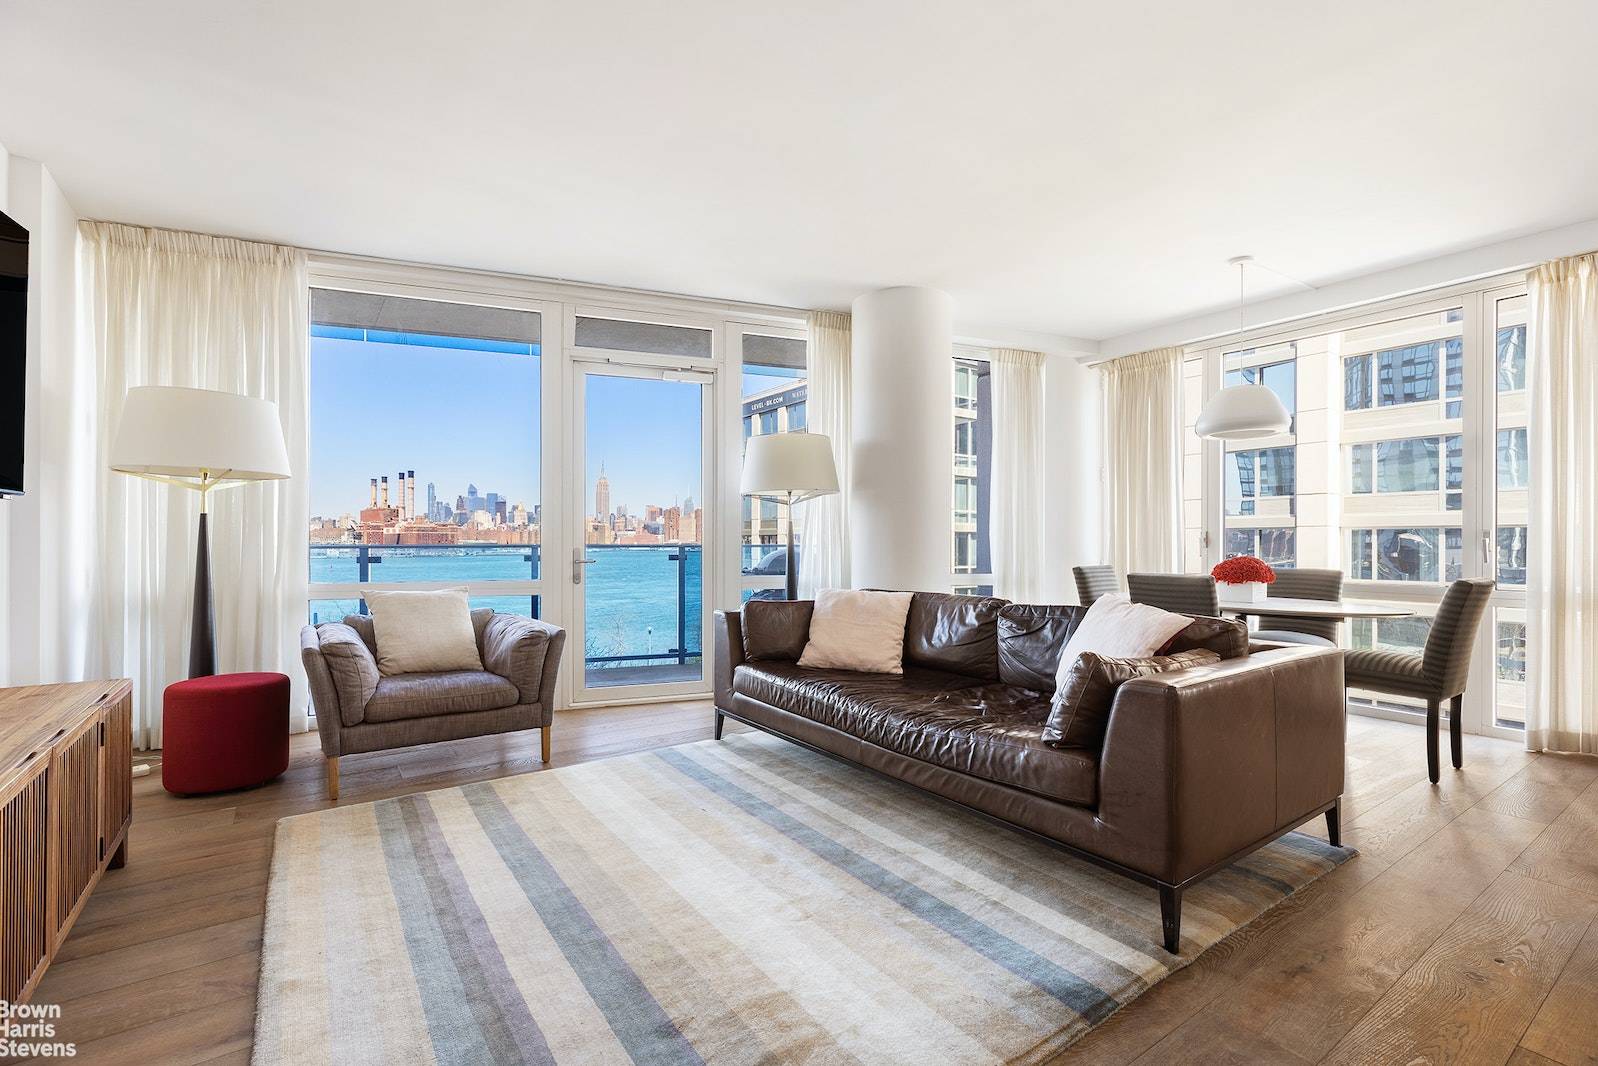 Get ready to enjoy one of the best views of the water and the iconic Manhattan skyline from Residence 5D at the Edge.